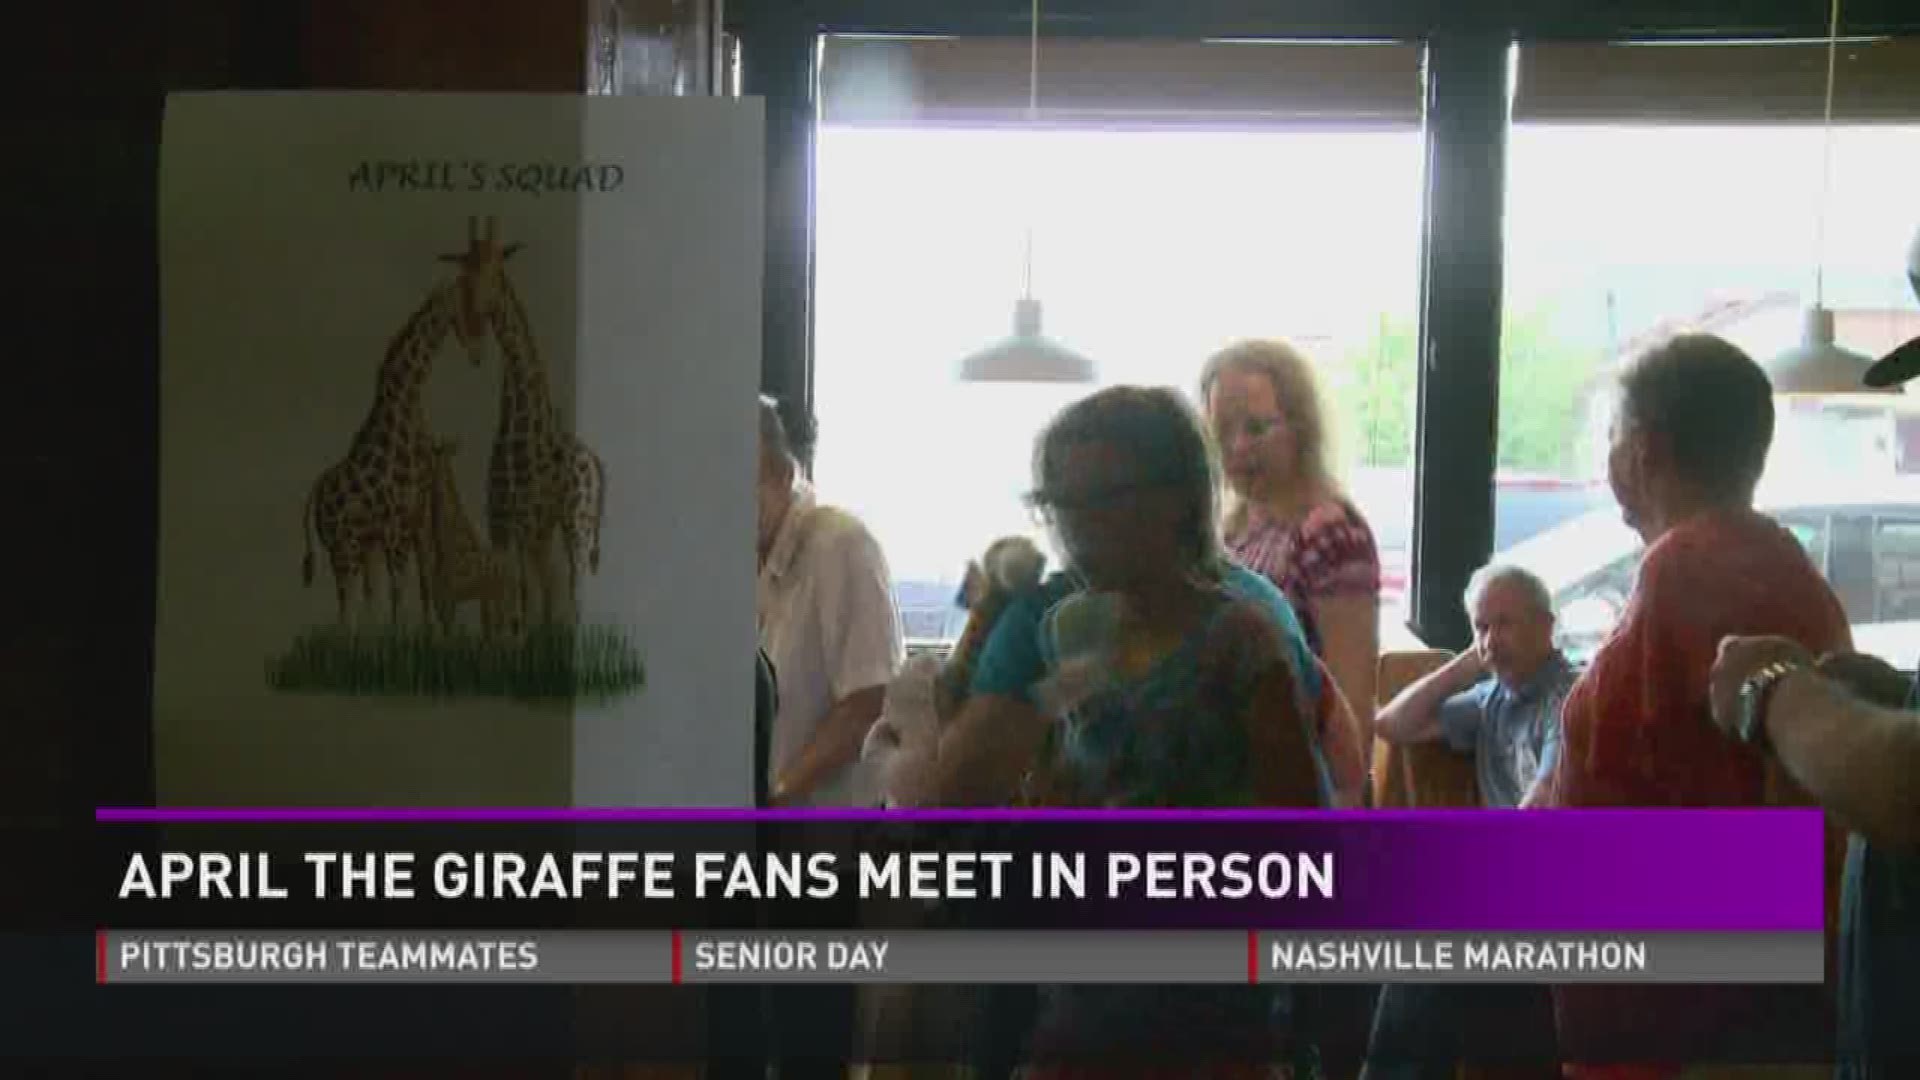 Even though #giraffewatch is over, the friendships that formed out of it are not.